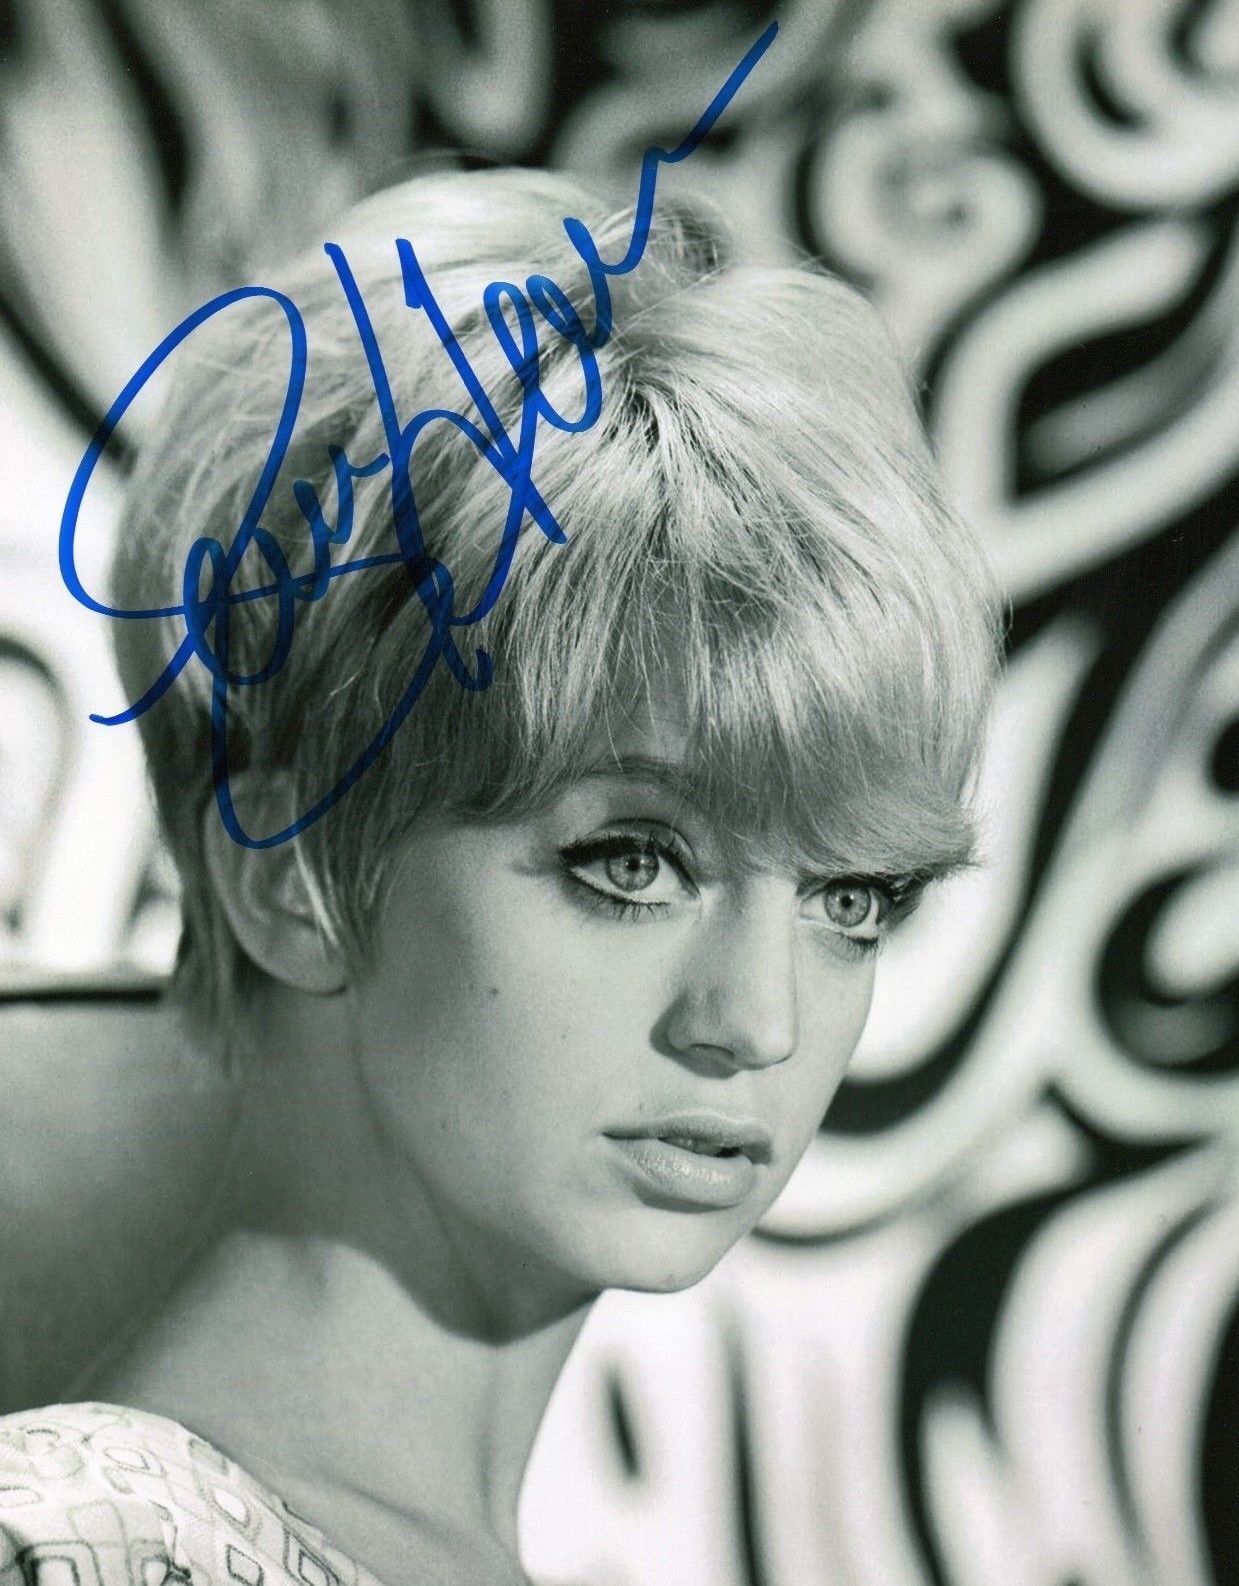 GOLDIE HAWN AUTOGRAPHED SIGNED A4 PP POSTER Photo Poster painting PRINT 3